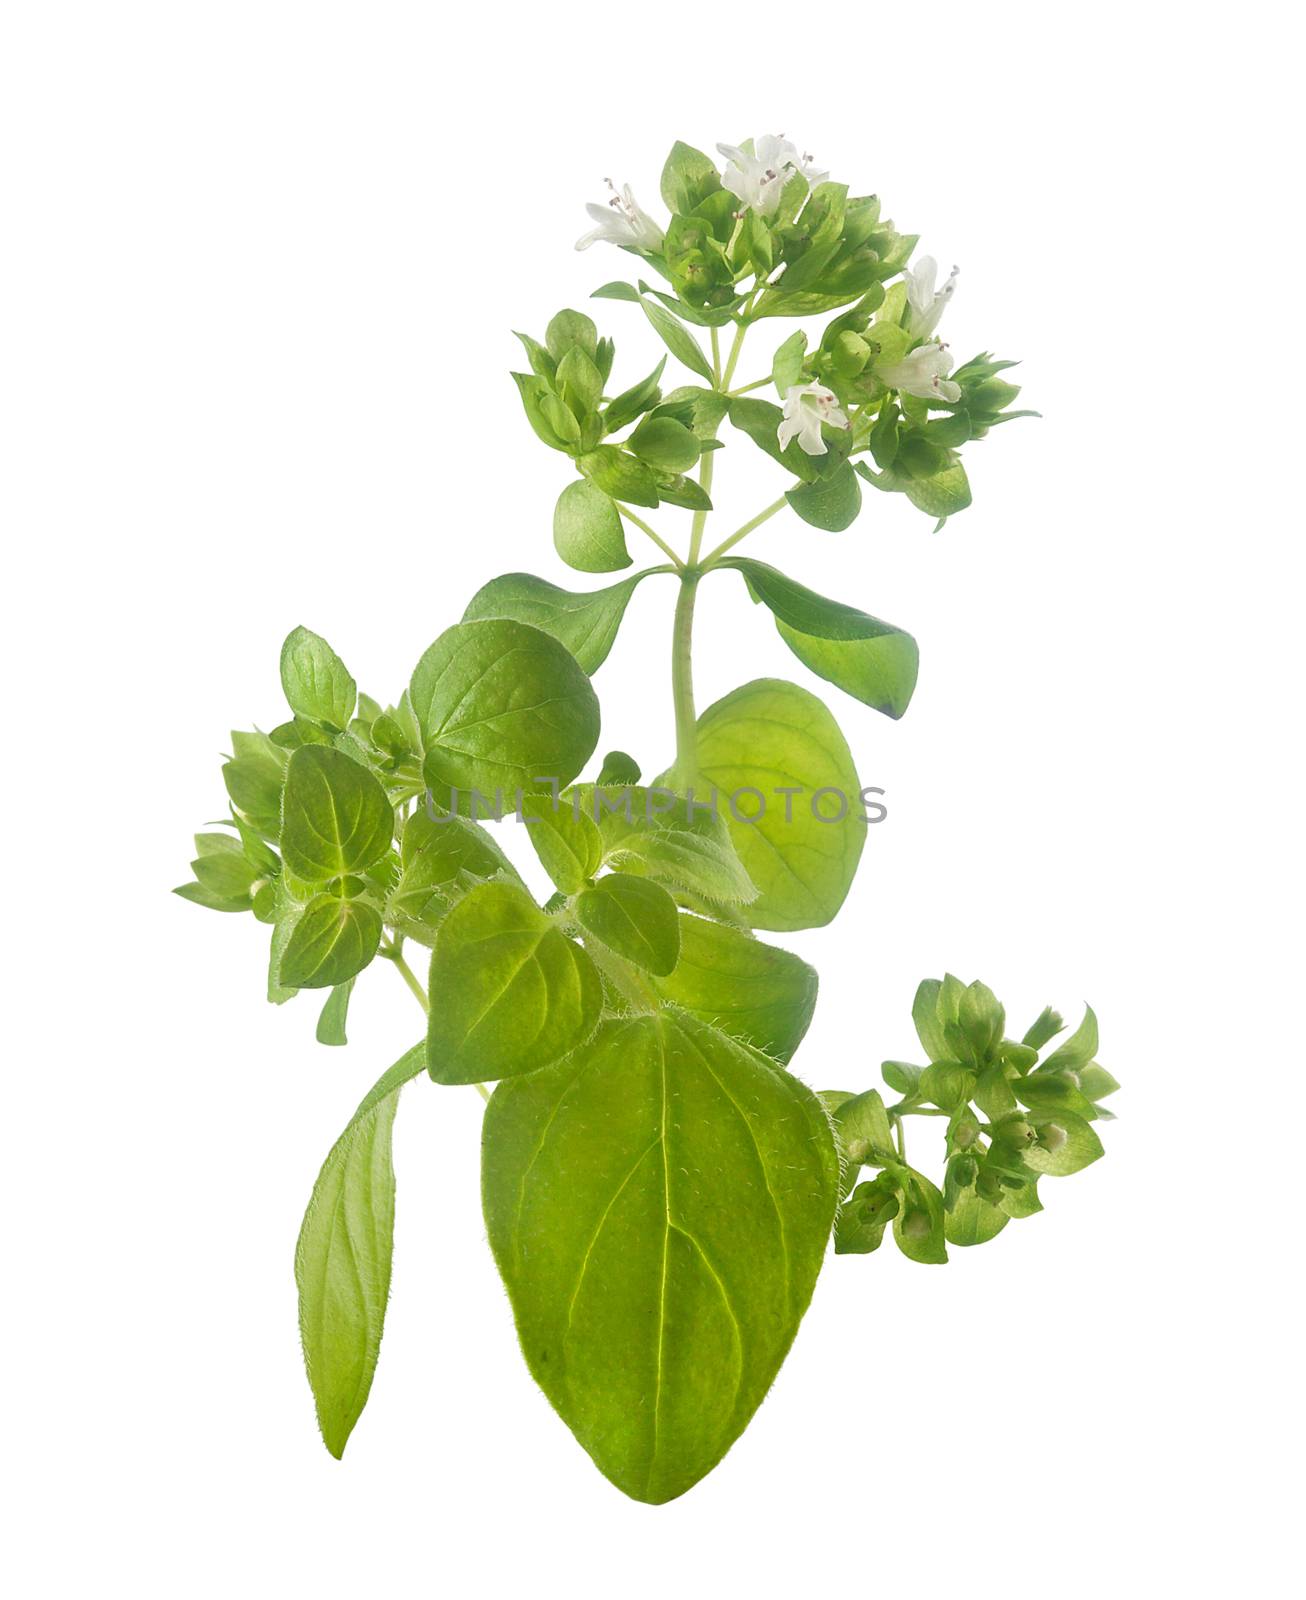 Isolated branch of common origanum with flowers and leaves